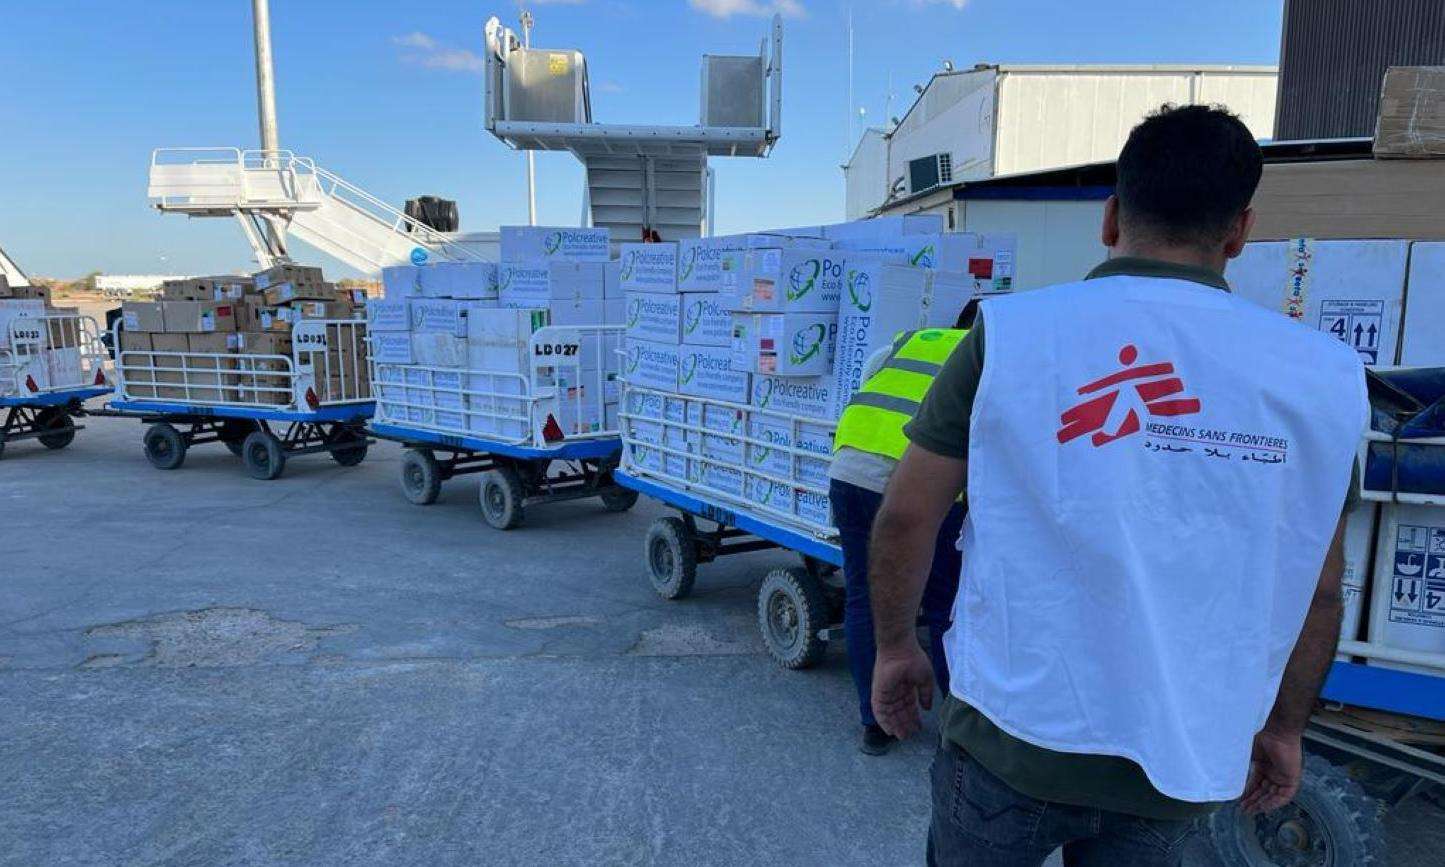 An MSF logistics coordinator supervises the convoy of medical material en route to Derna, Libya.